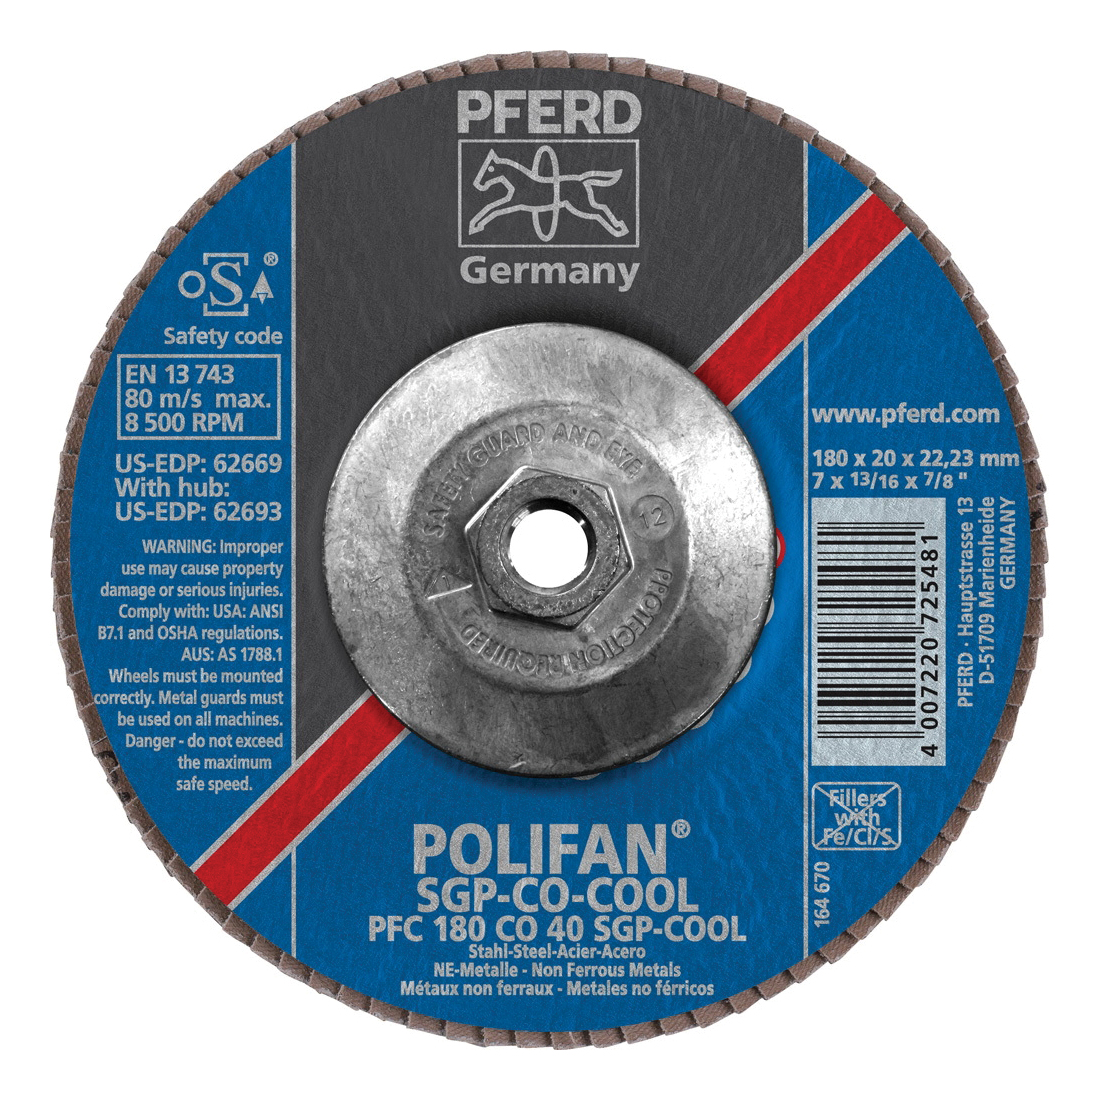 PFERD Polifan® 62693 Special Line SGP CO-COOL Threaded Coated Abrasive Flap Disc, 7 in Dia, 40 Grit, Ceramic Oxide Abrasive, Type 29 Conical Disc